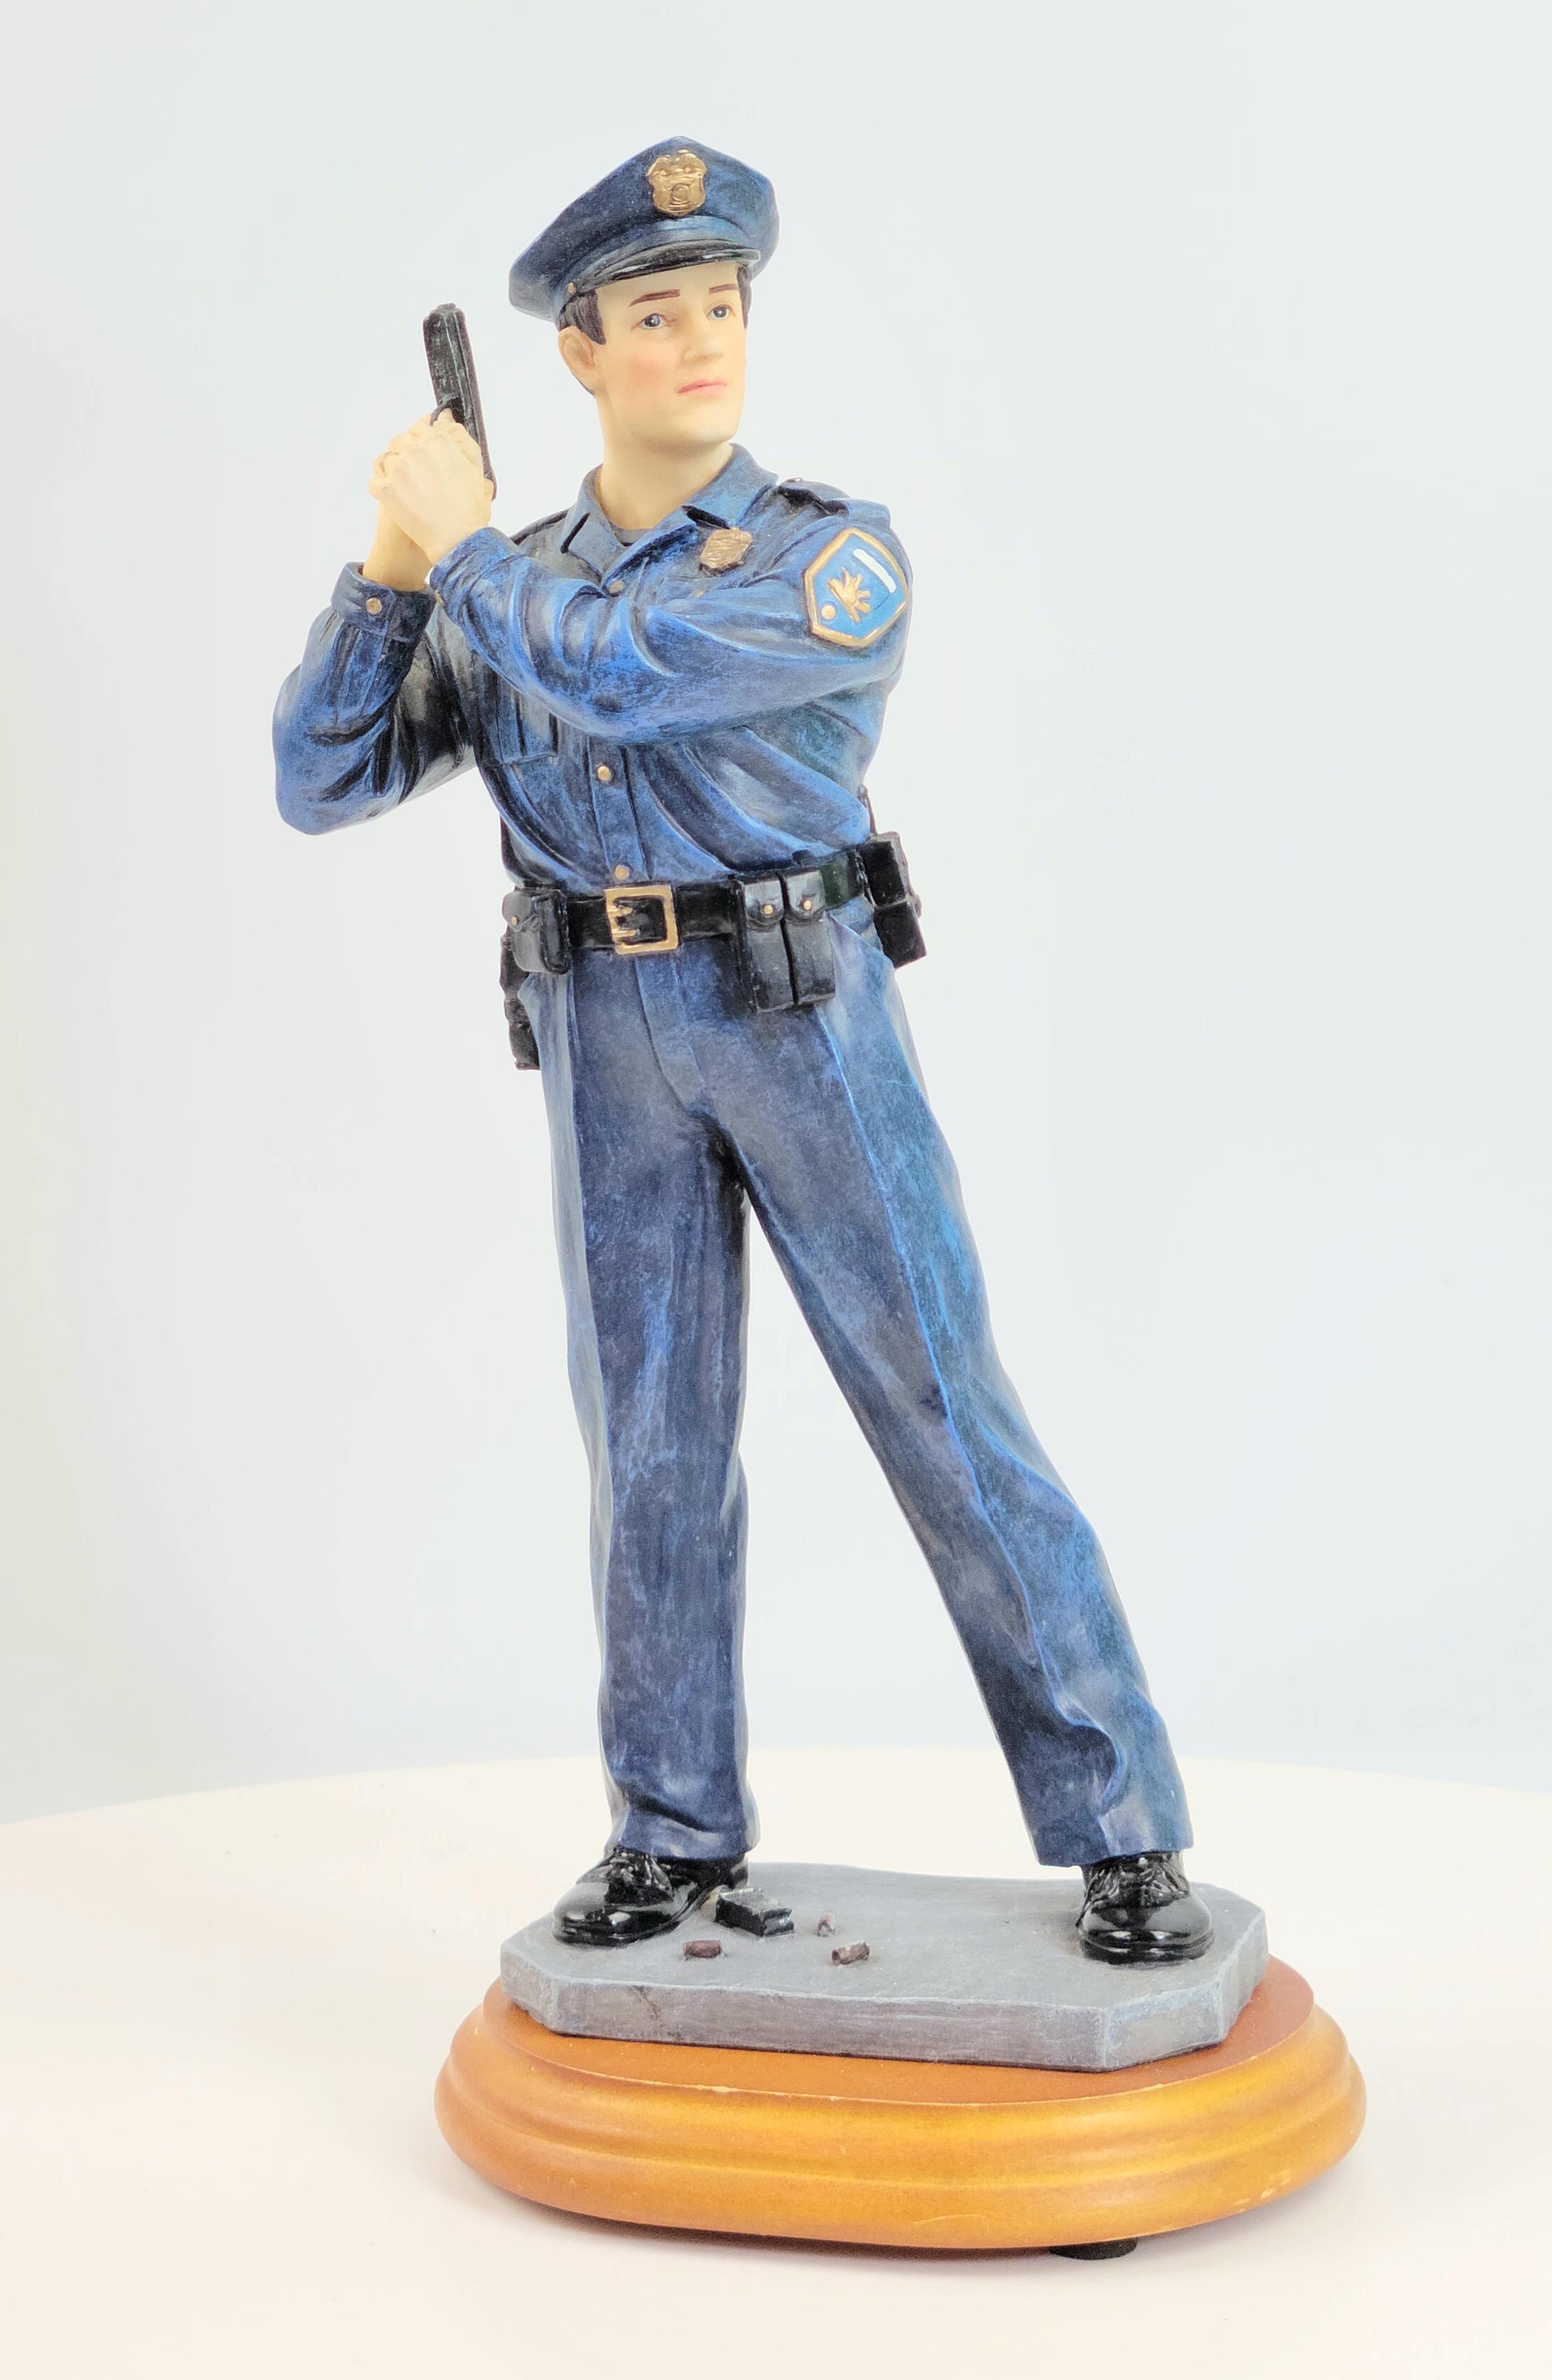 Vanmark Blue Hats Of Bravery "Ready And Waiting" Limited Edition Police Figurine